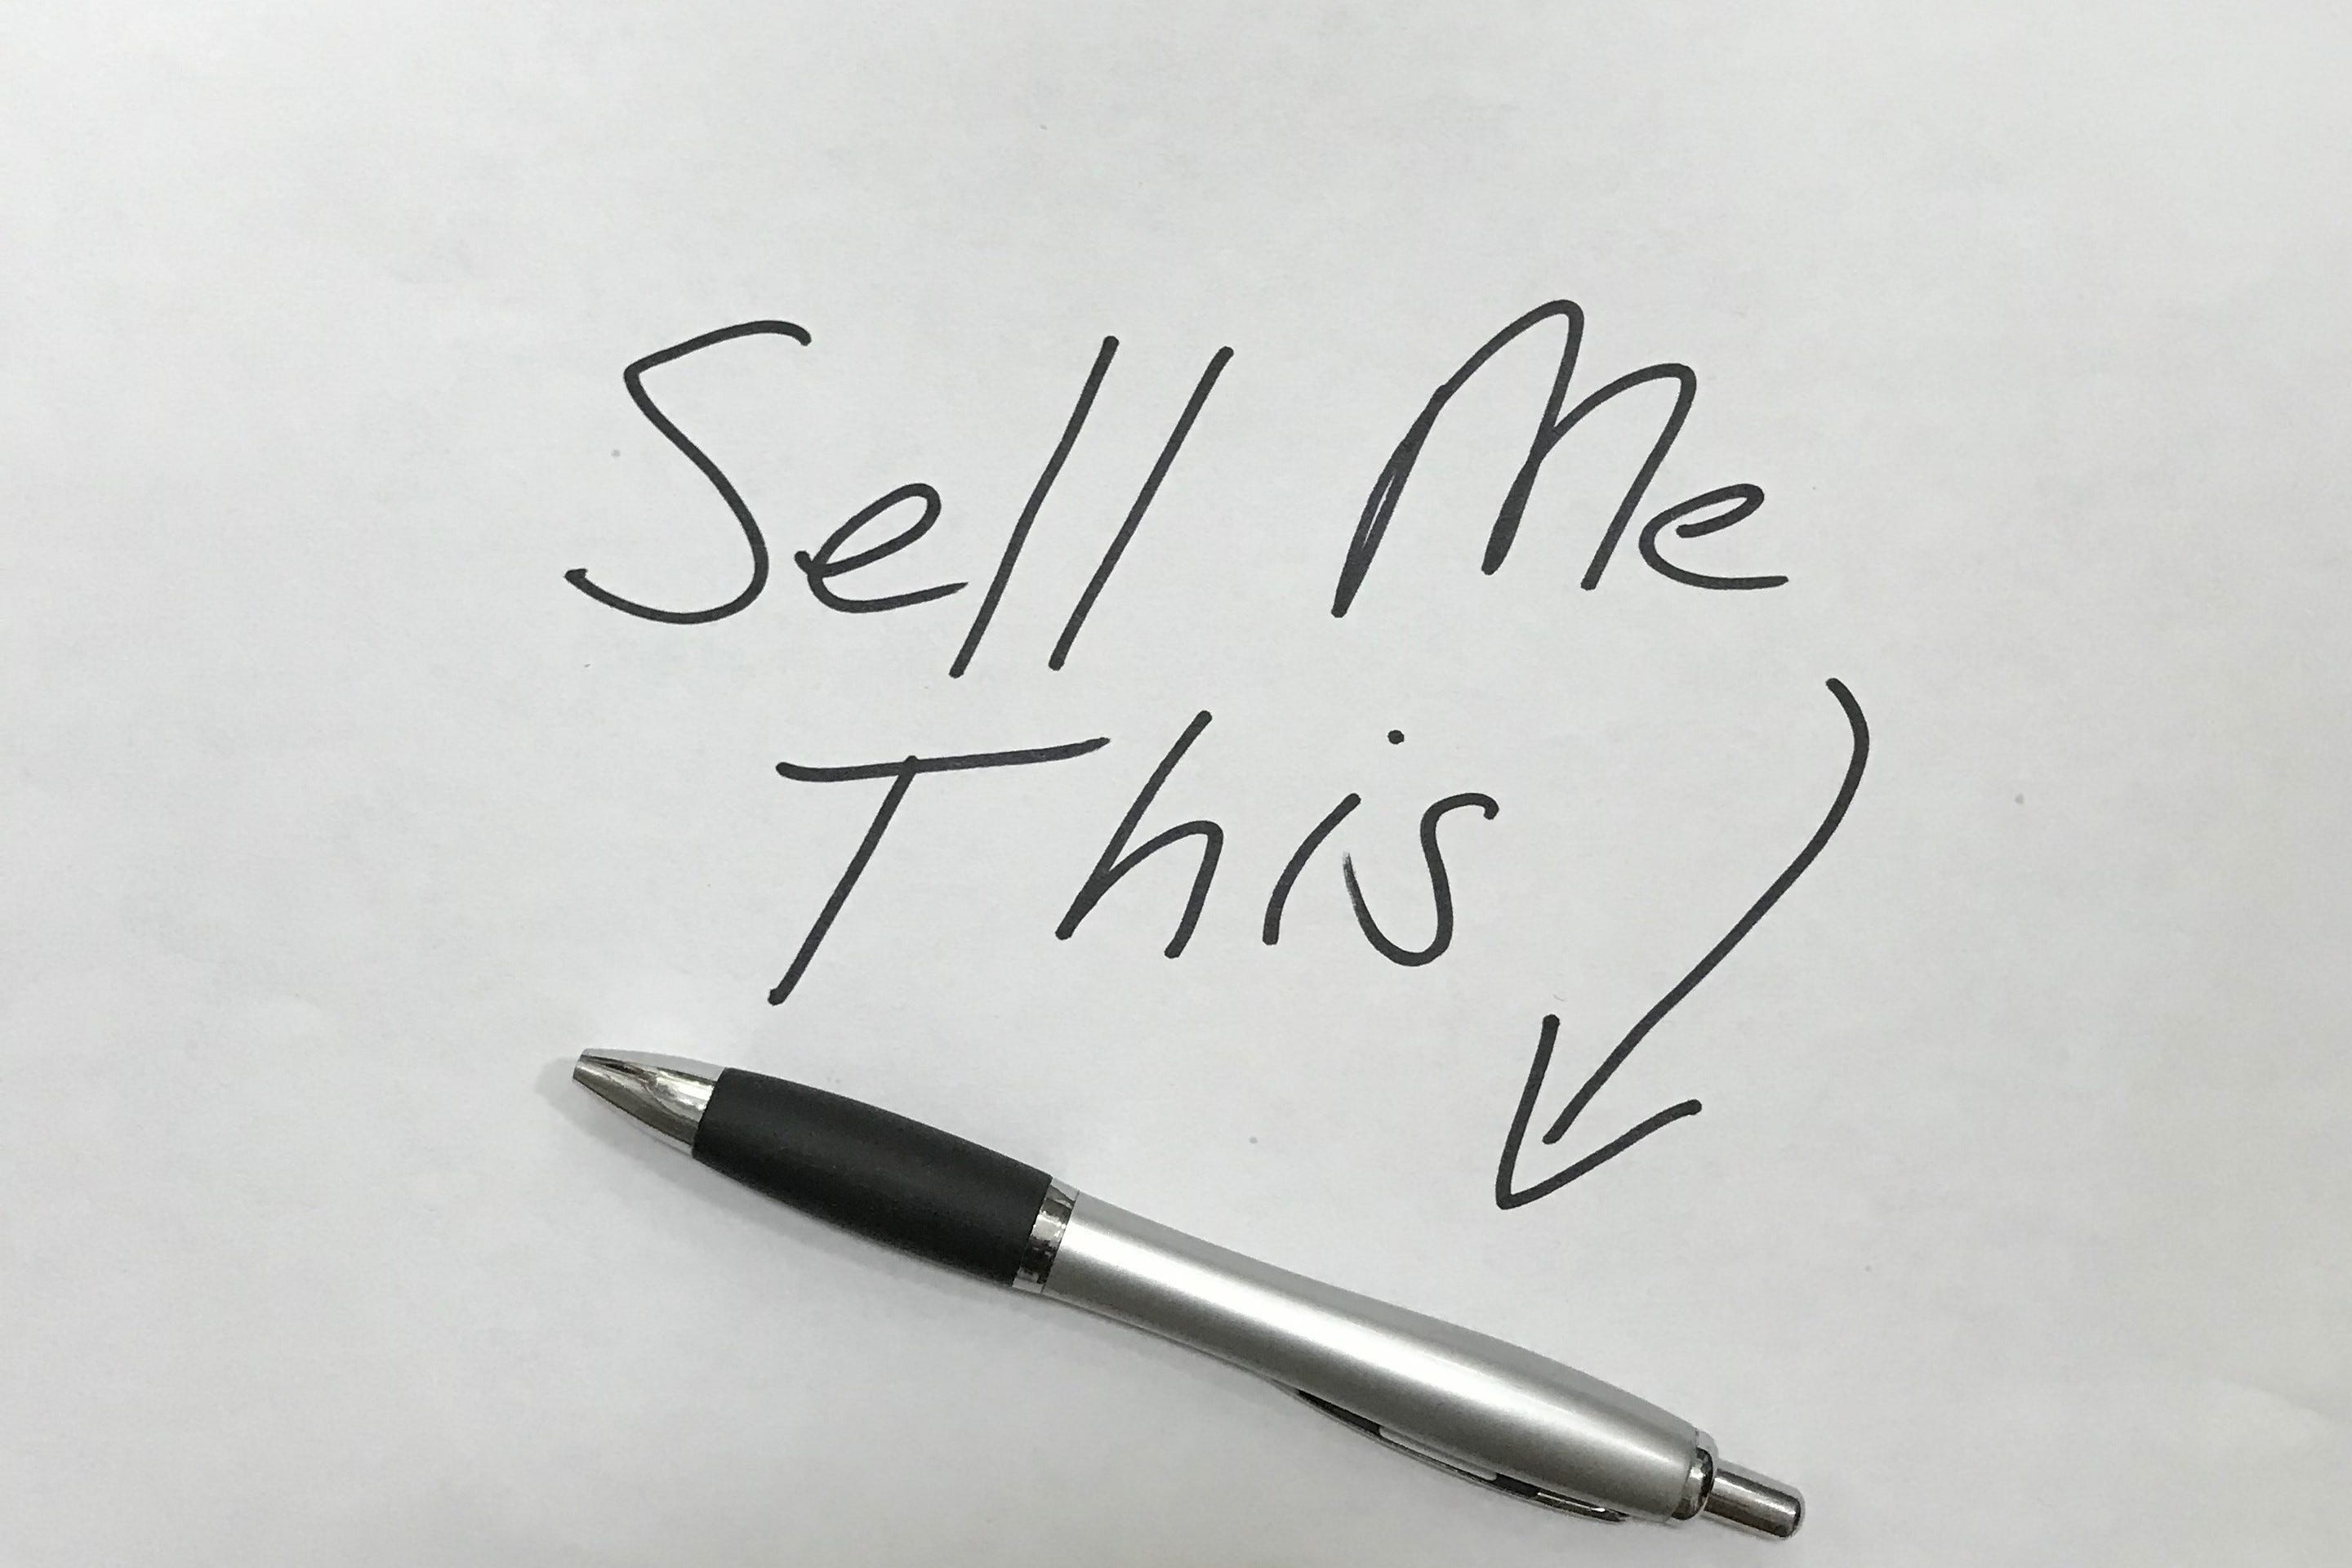 Sell Me This Pen. Do You Know the Right Way to Sell the Pen?